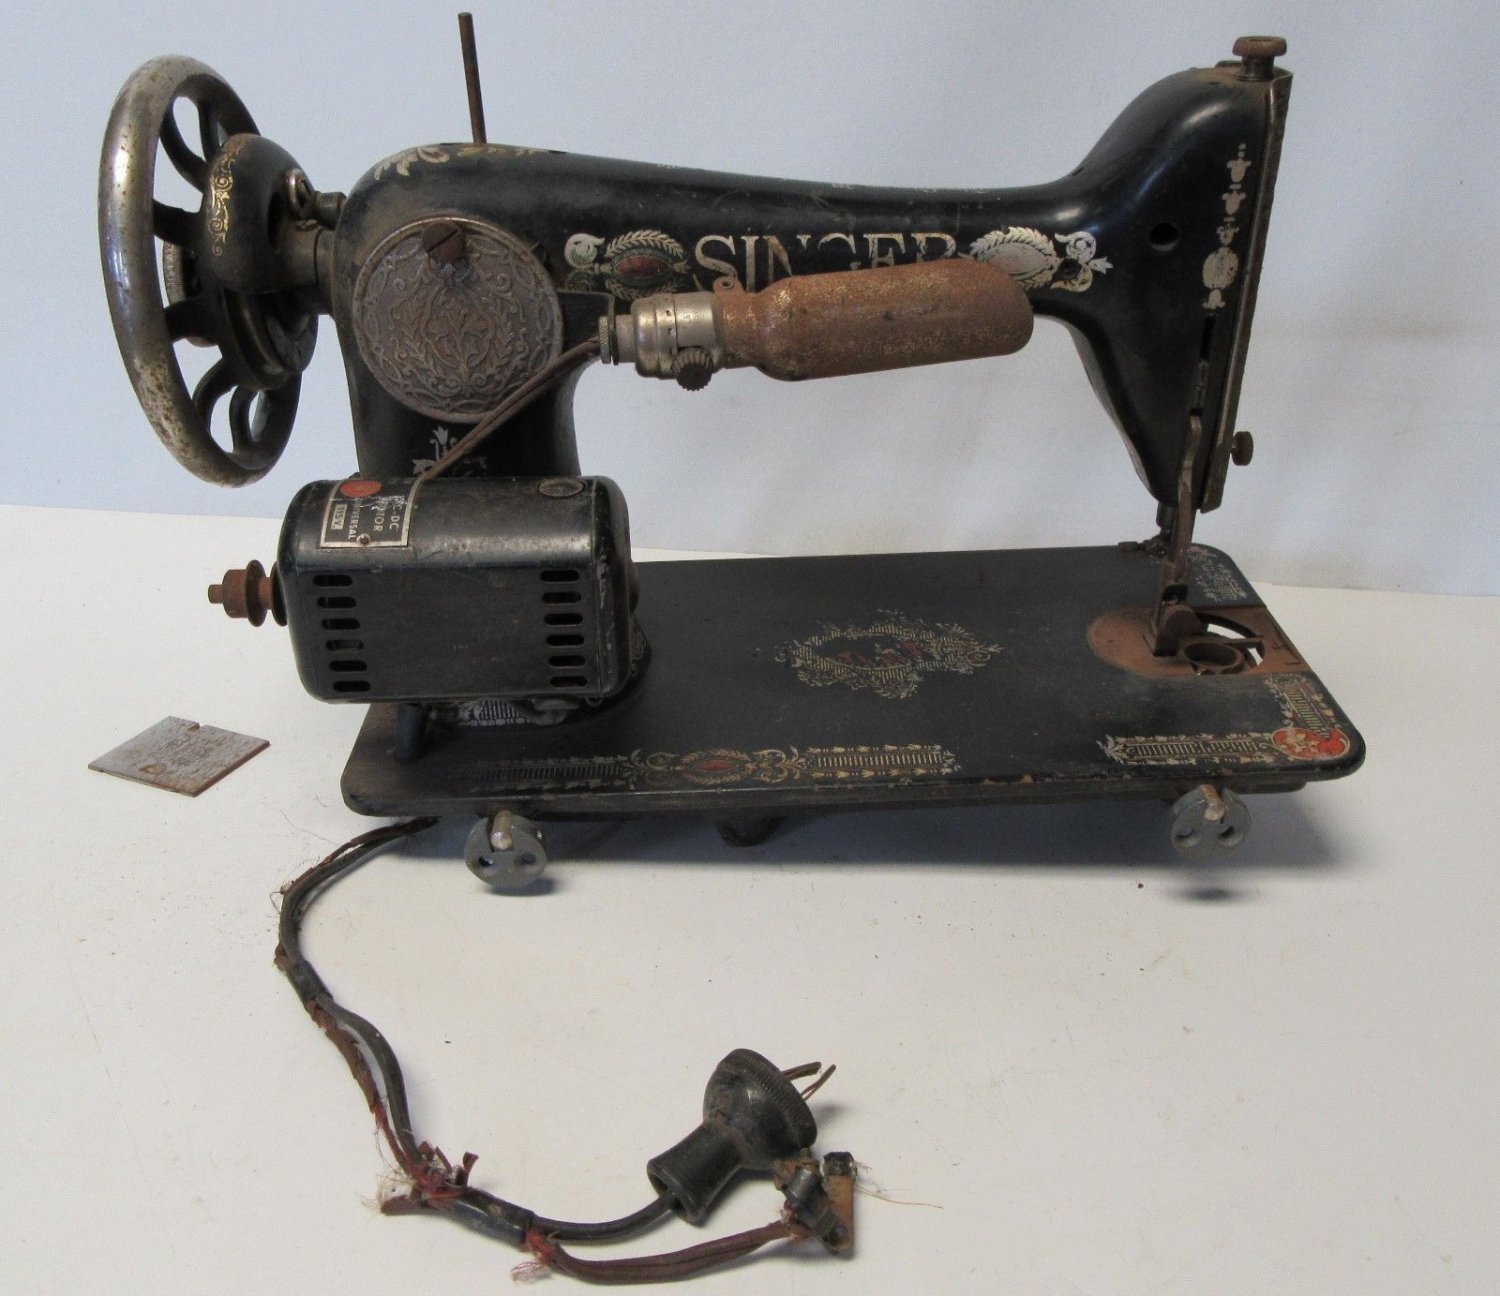 Electric SINGER SEWING MACHINE MODEL 66 "RED EYE" FOR PARTS/RESTORATION